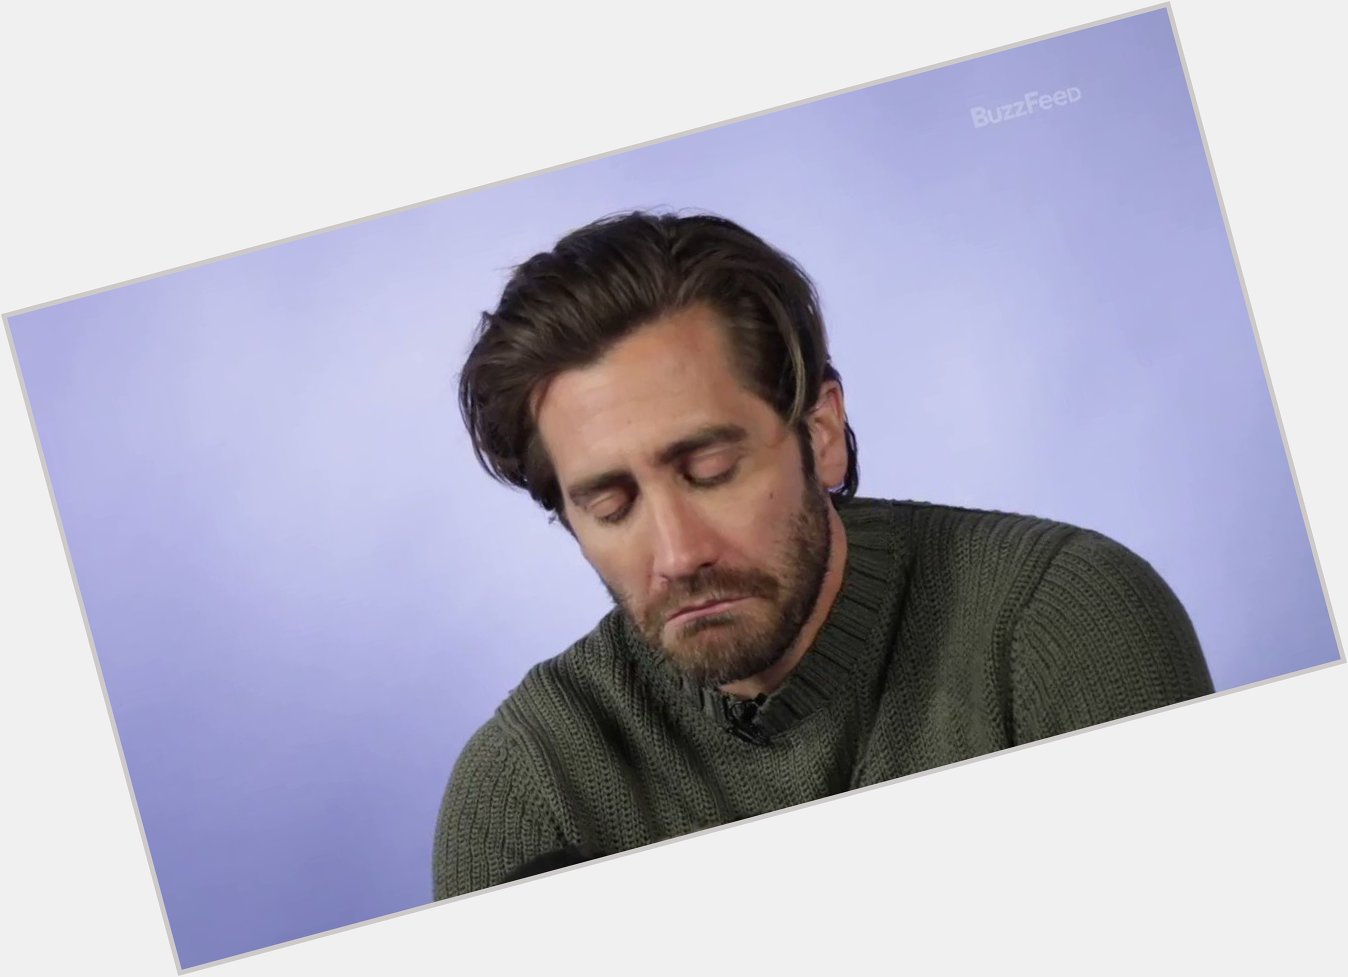 Happy Birthday, Jake Gyllenhaal! We can all use this video of him with a puppy 